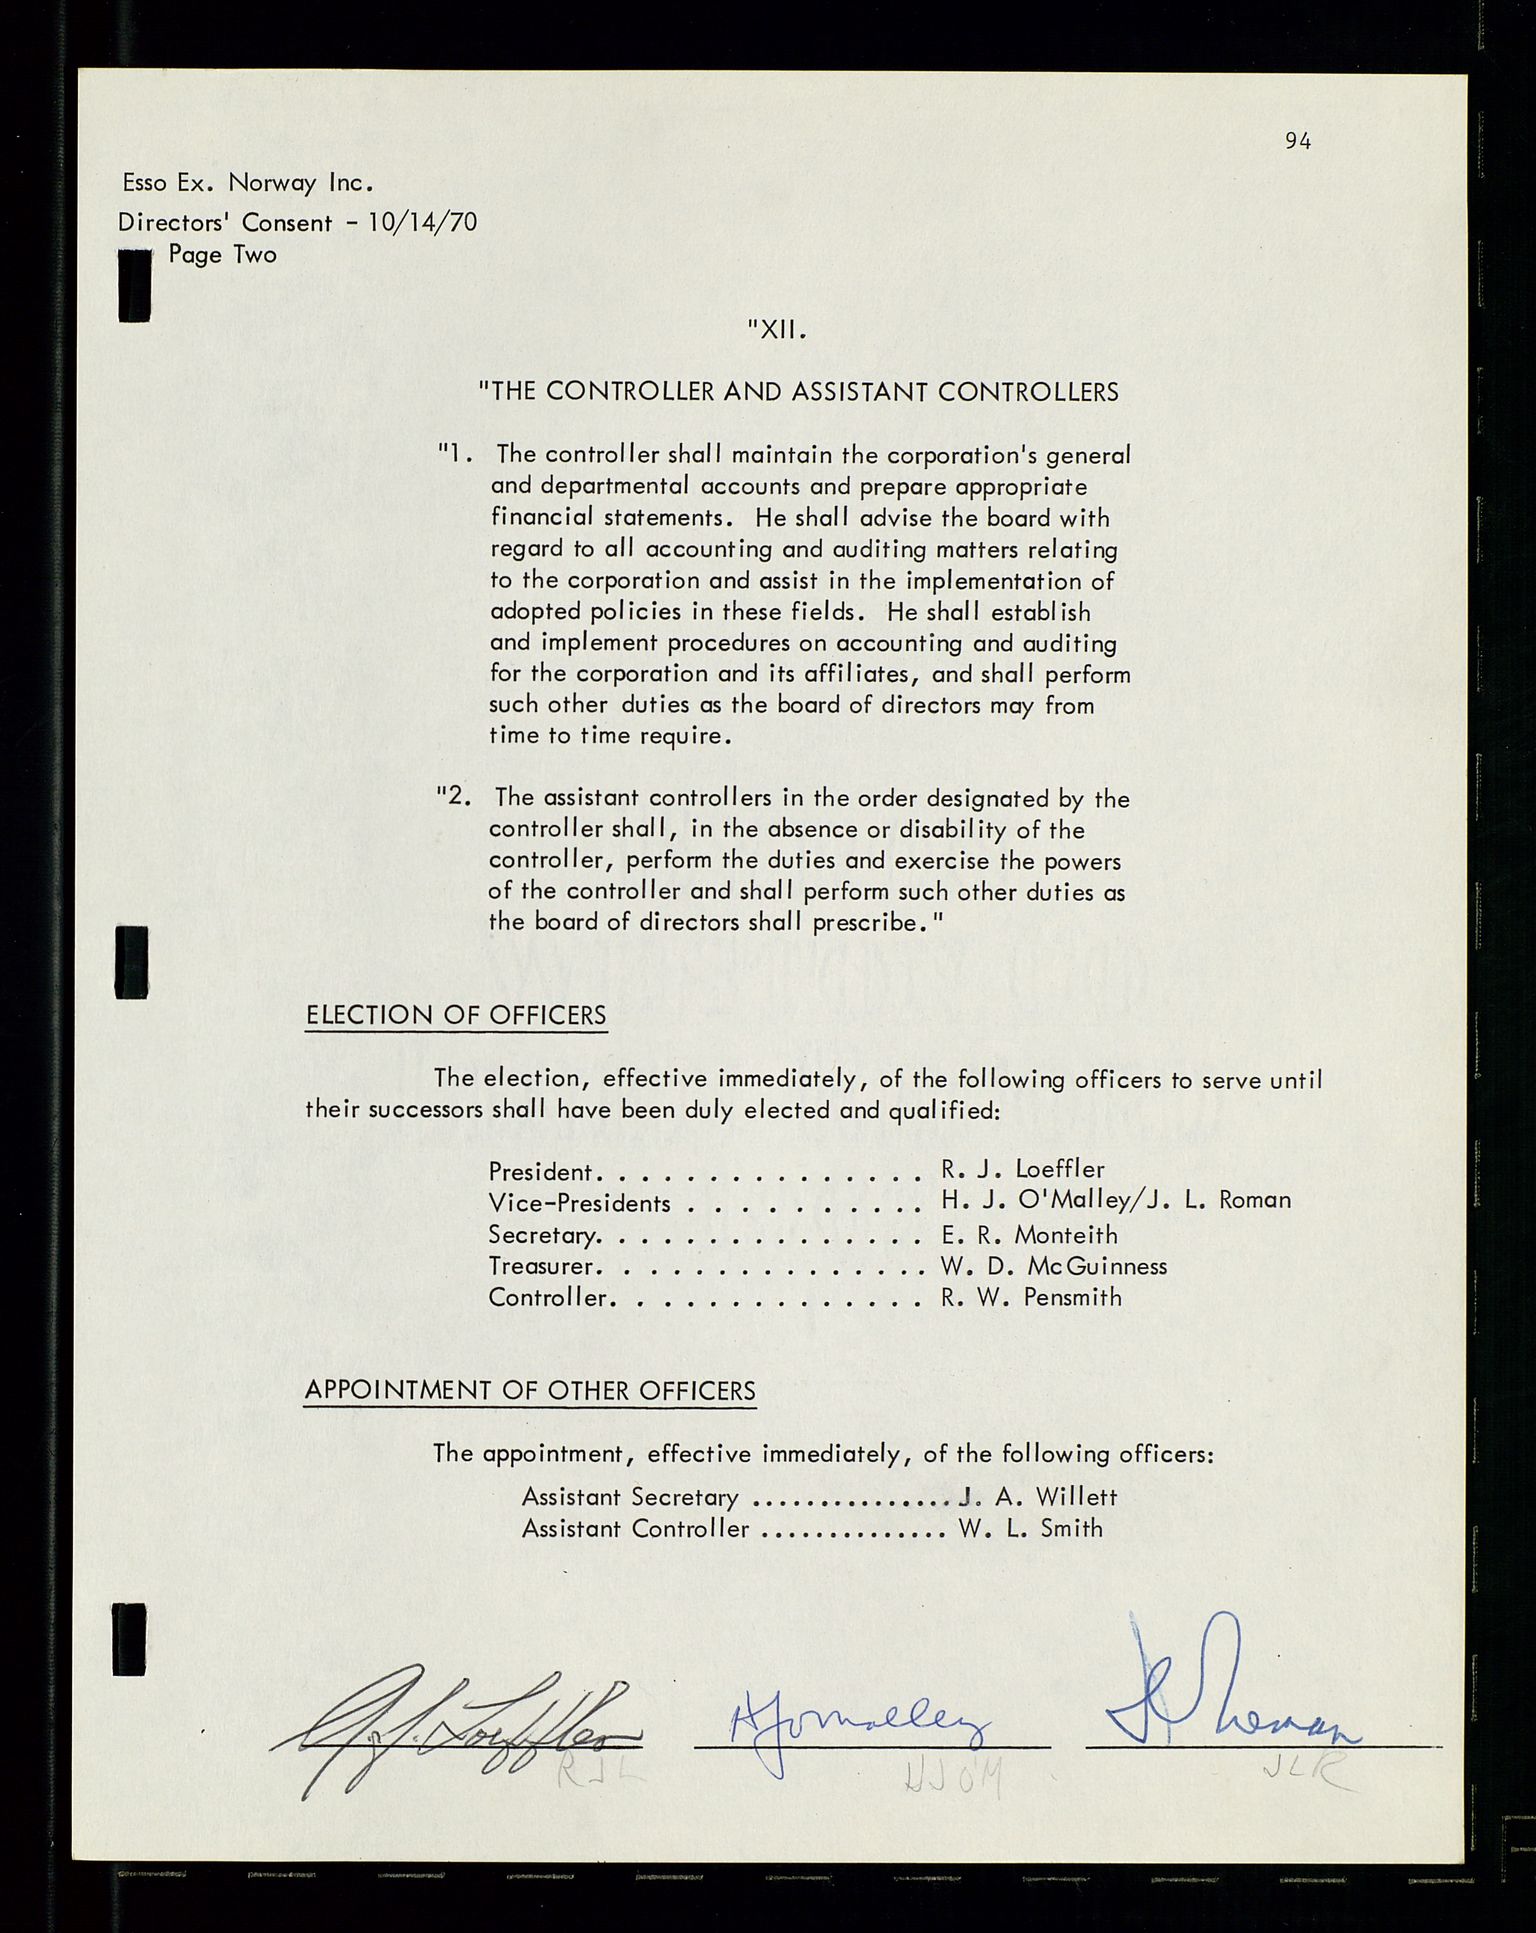 Pa 1512 - Esso Exploration and Production Norway Inc., SAST/A-101917/A/Aa/L0001/0001: Styredokumenter / Corporate records, By-Laws, Board meeting minutes, Incorporations, 1965-1975, s. 94